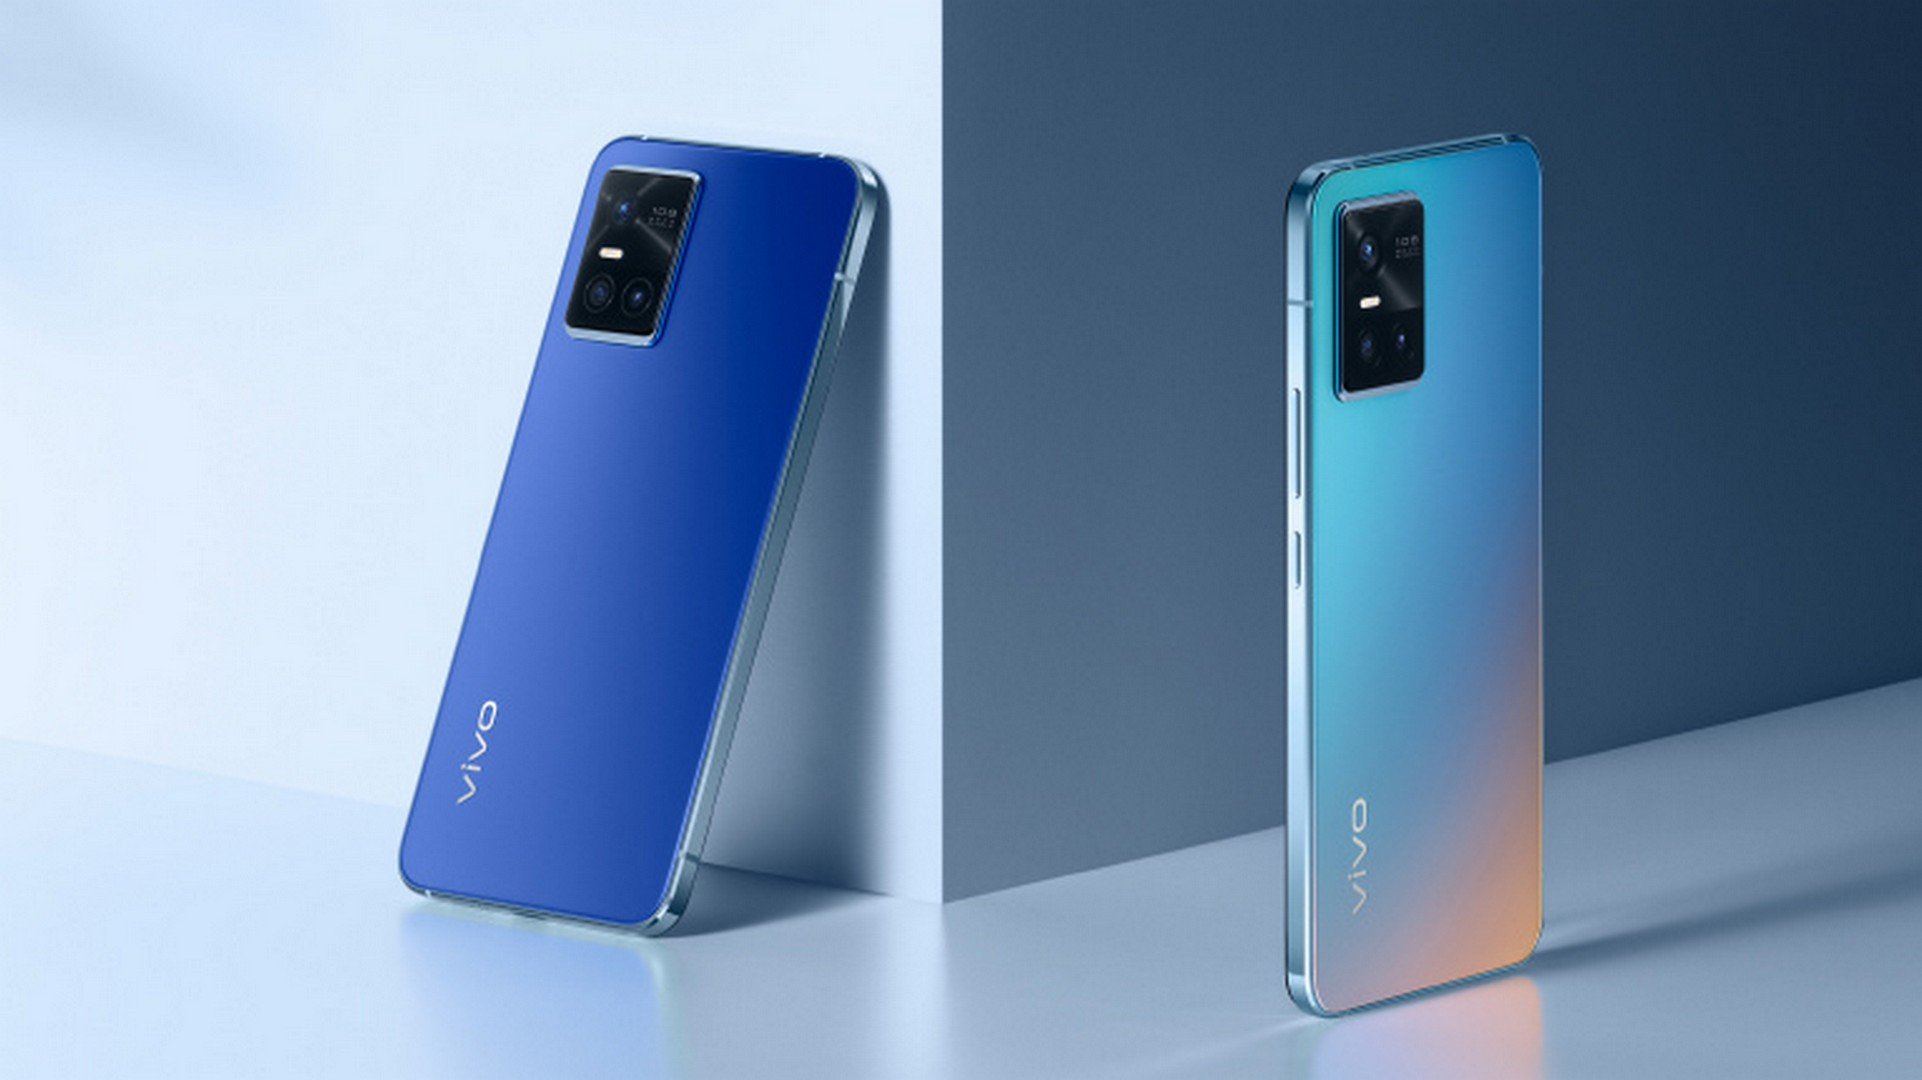 Vivo-S10-and-Vivo-S10-Pro-launched-in-China-with-44MP-dual-Selfie-Dimensity-1100-and-44W-fast-charging-support-1